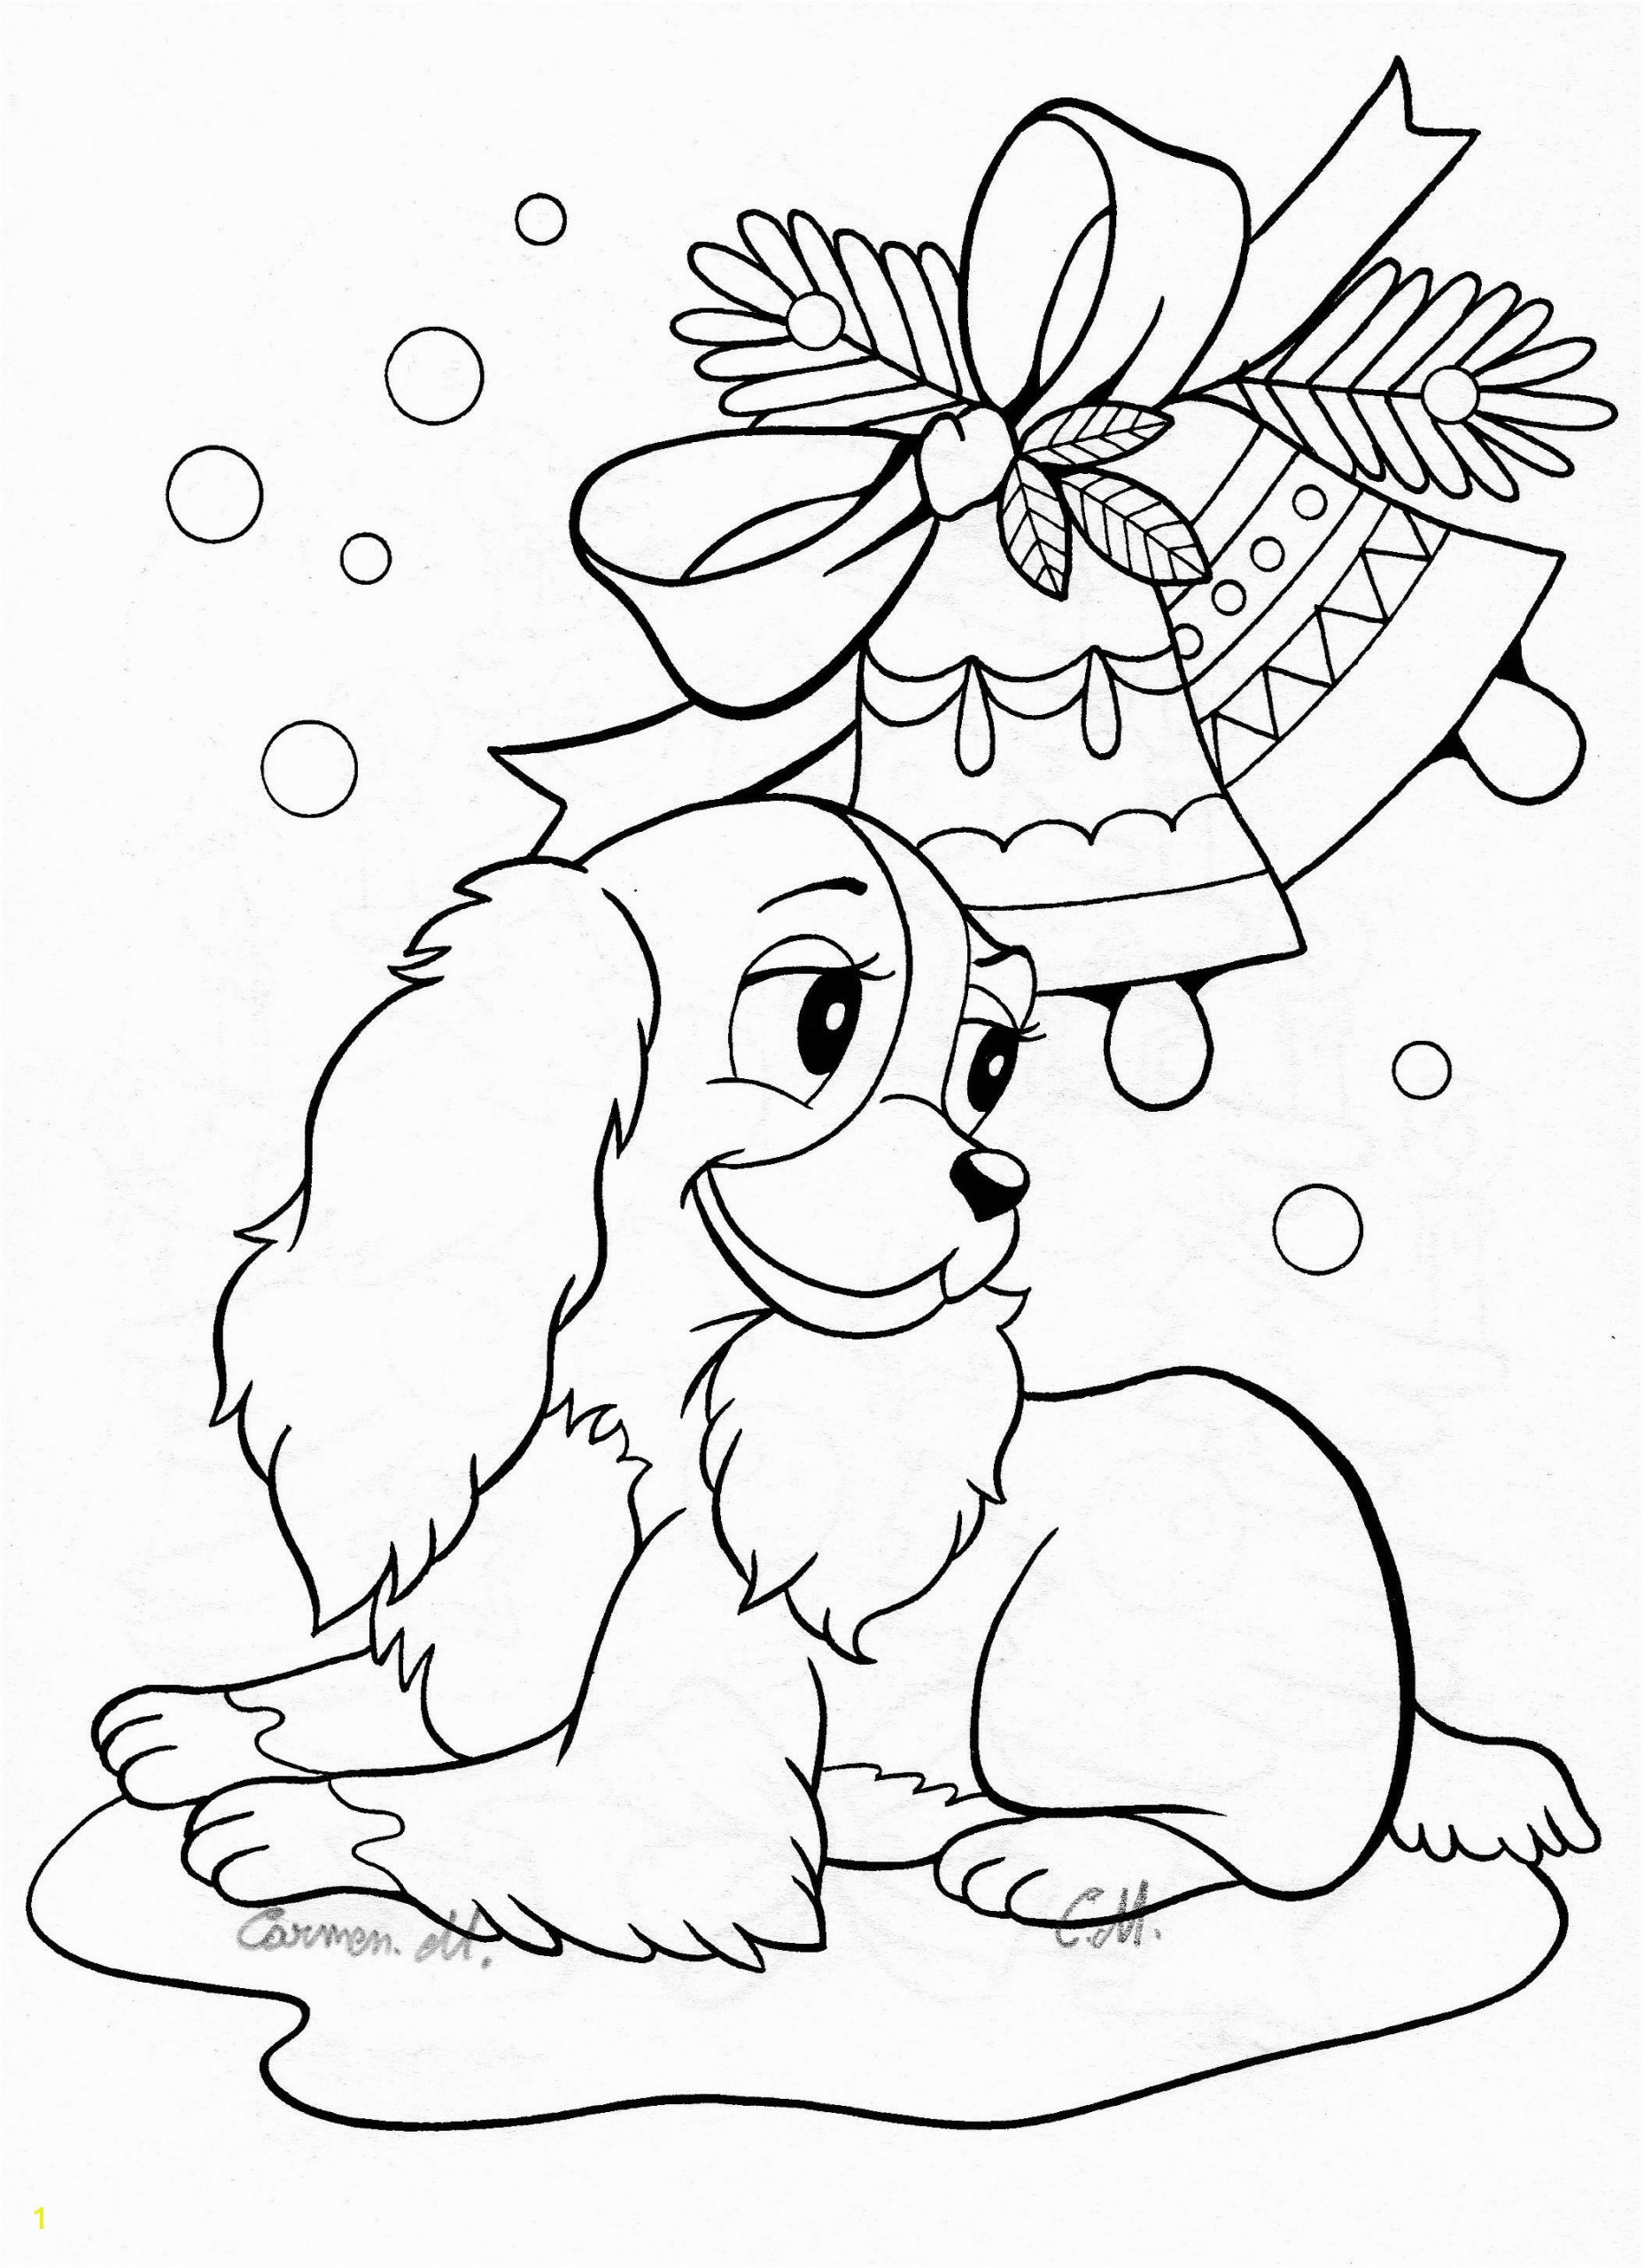 christmas pet coloring pages fresh printable od dog free colouring of animal pictures beautiful me farm sheets for toddlers page batman pdf to color bird princess winter